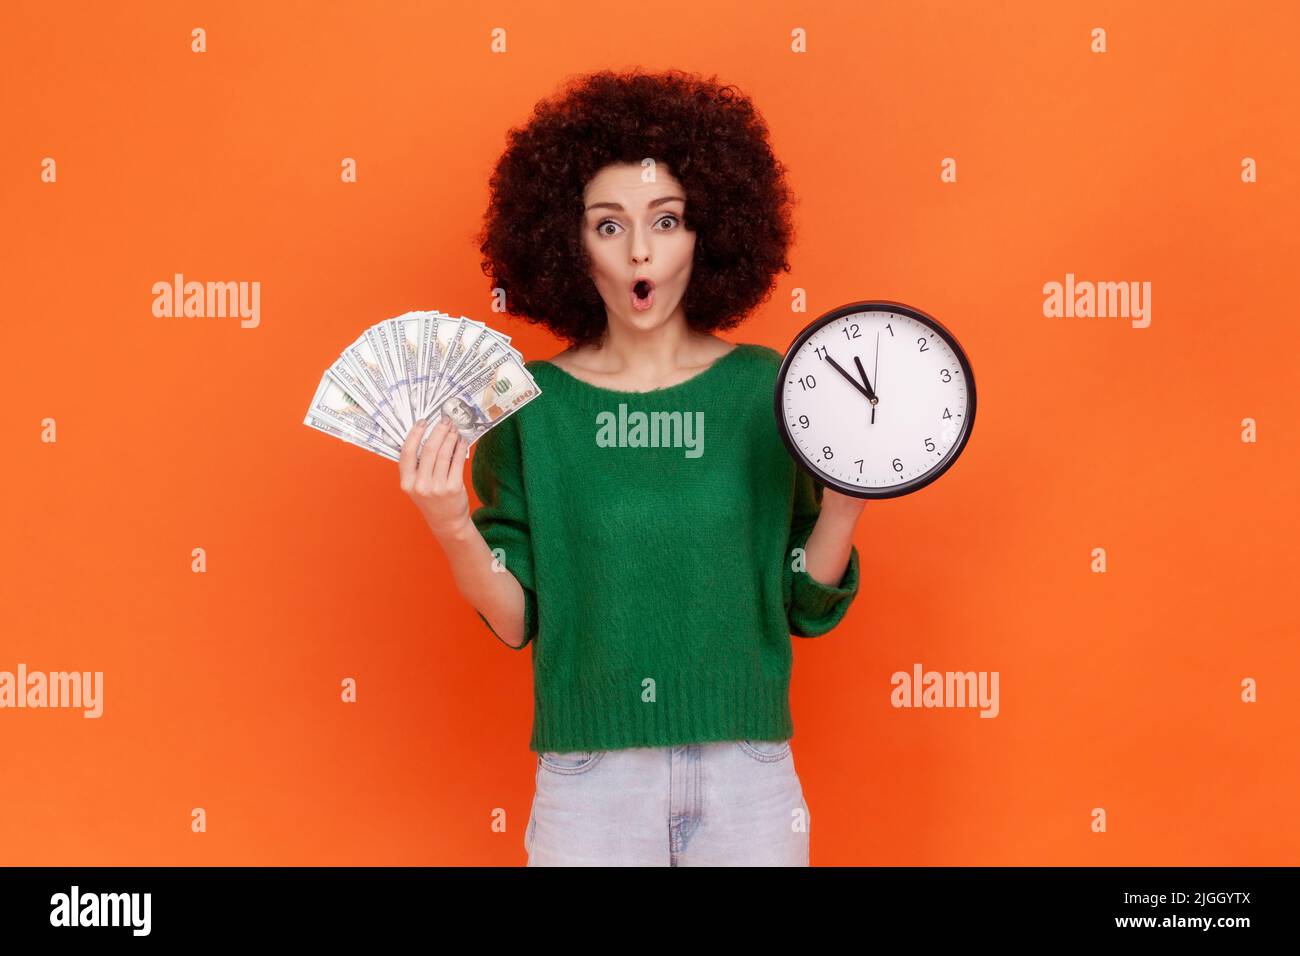 Shocked astonished woman with Afro hairstyle wearing green casual style sweater holding wall clock and dollar banknotes, surprised expression. Indoor studio shot isolated on orange background. Stock Photo